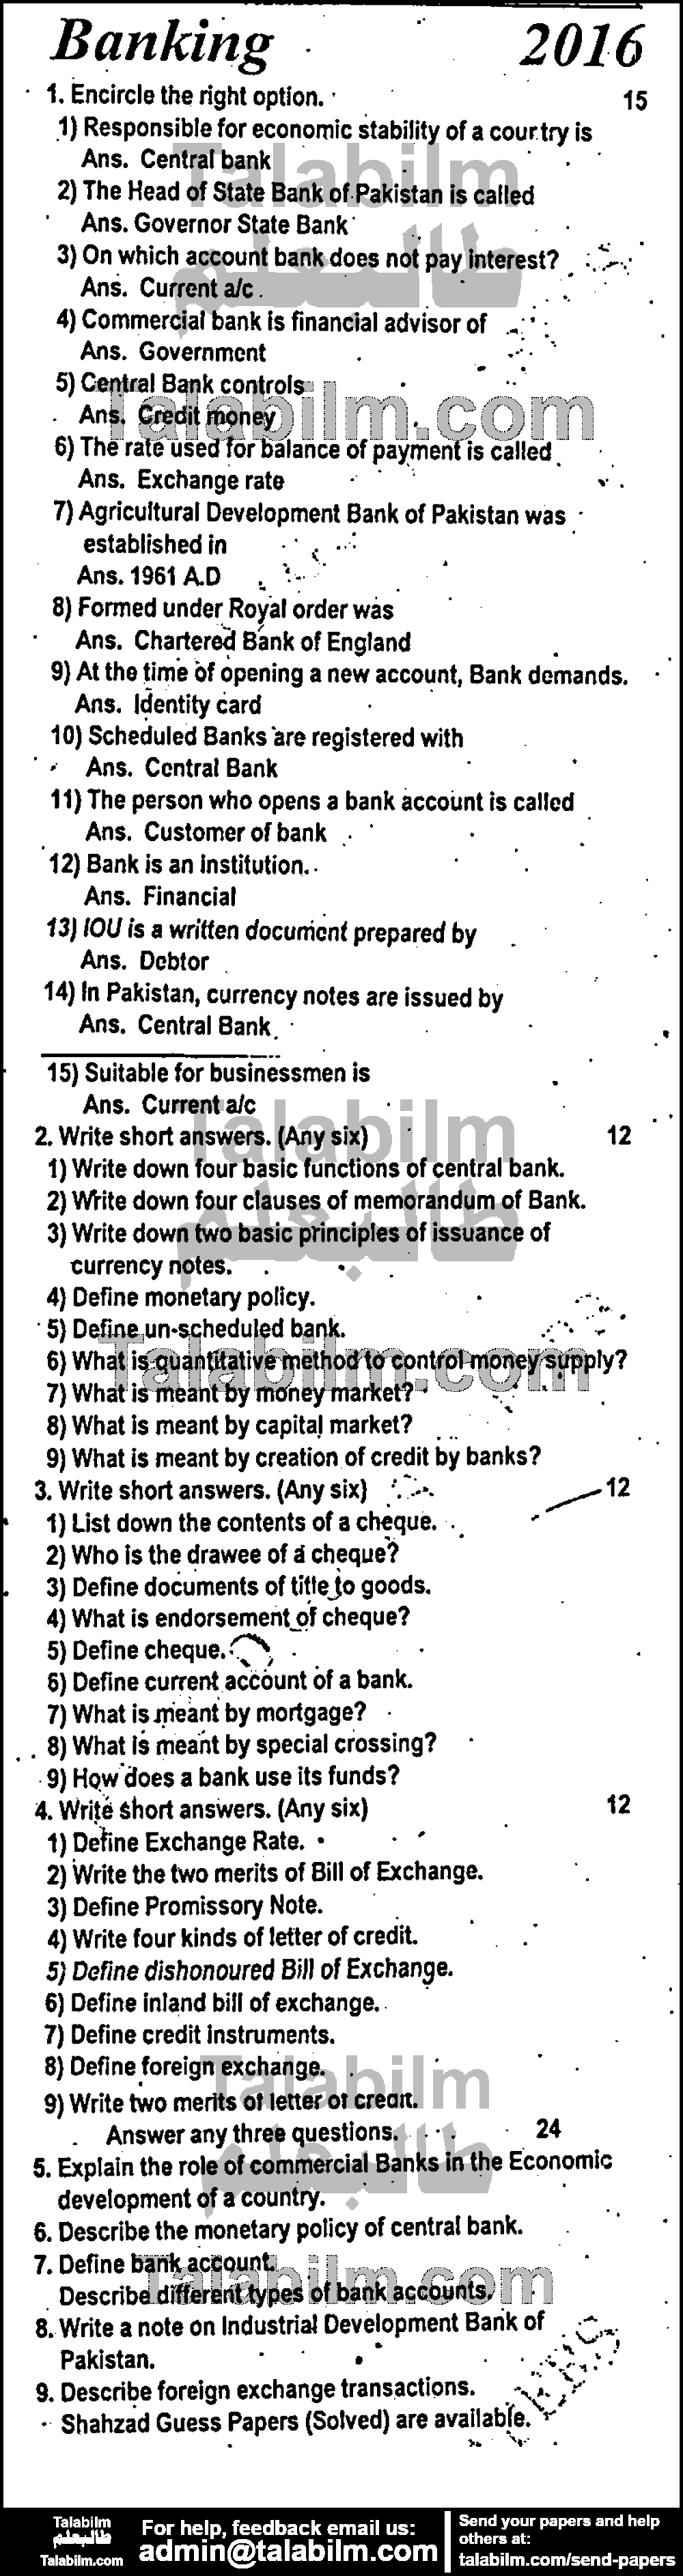 Principles of Banking 0 past paper for Group-I 2016